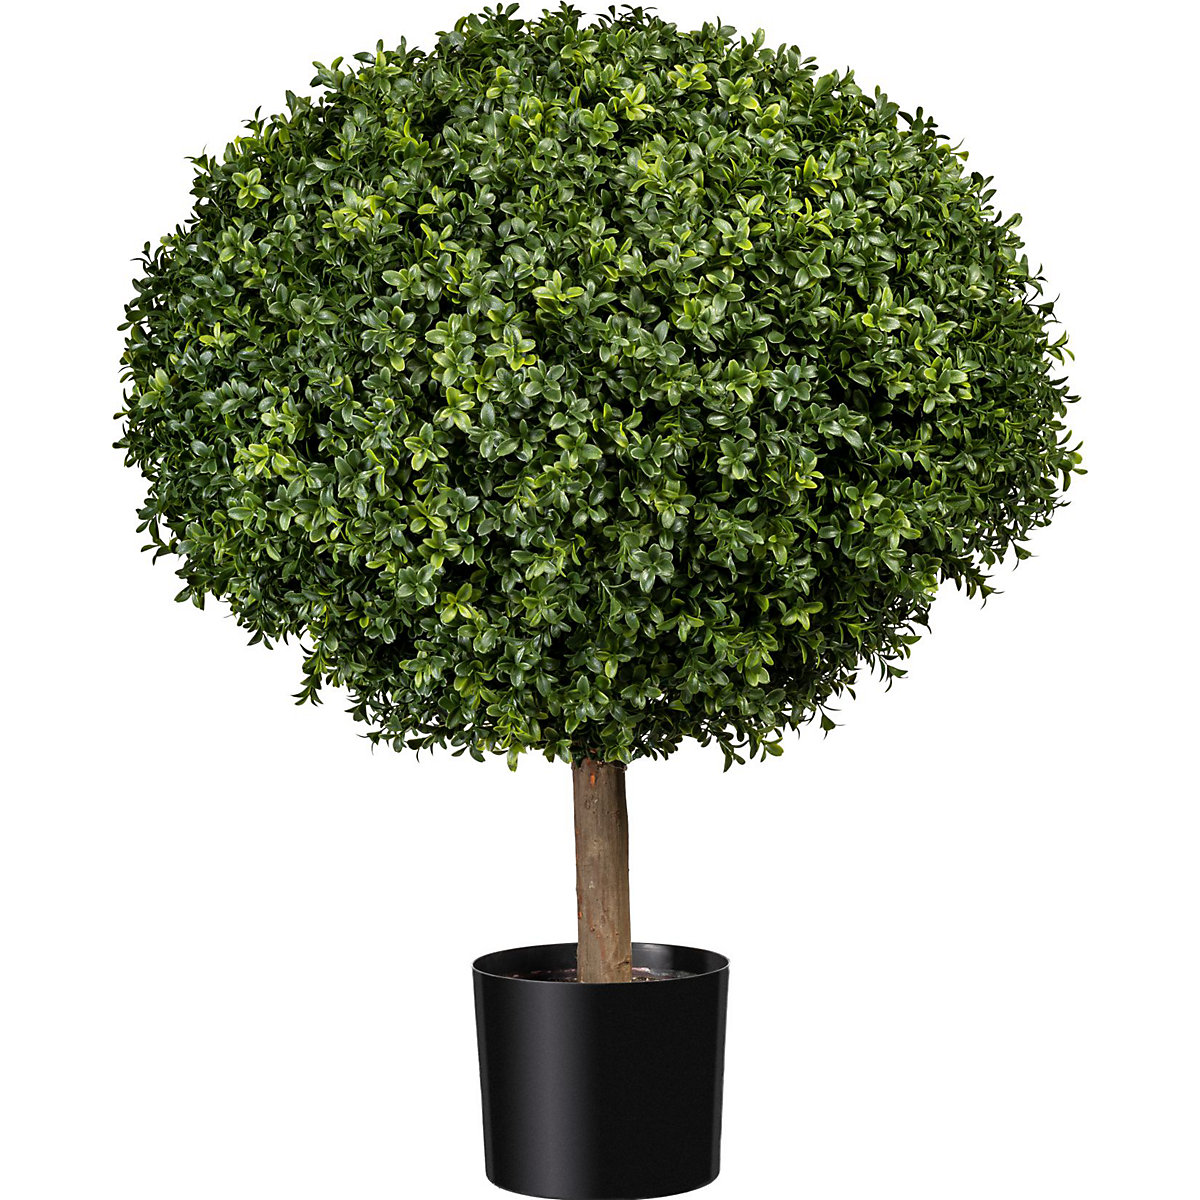 Spherical boxwood on a natural trunk